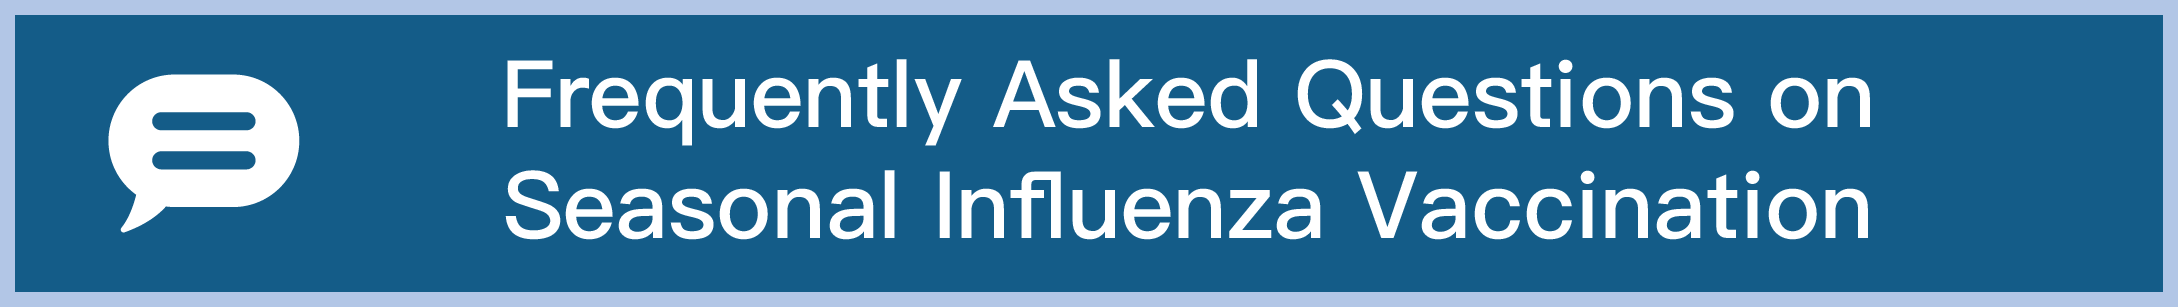 Frequently Asked Questions on Seasonal Influenza Vaccination